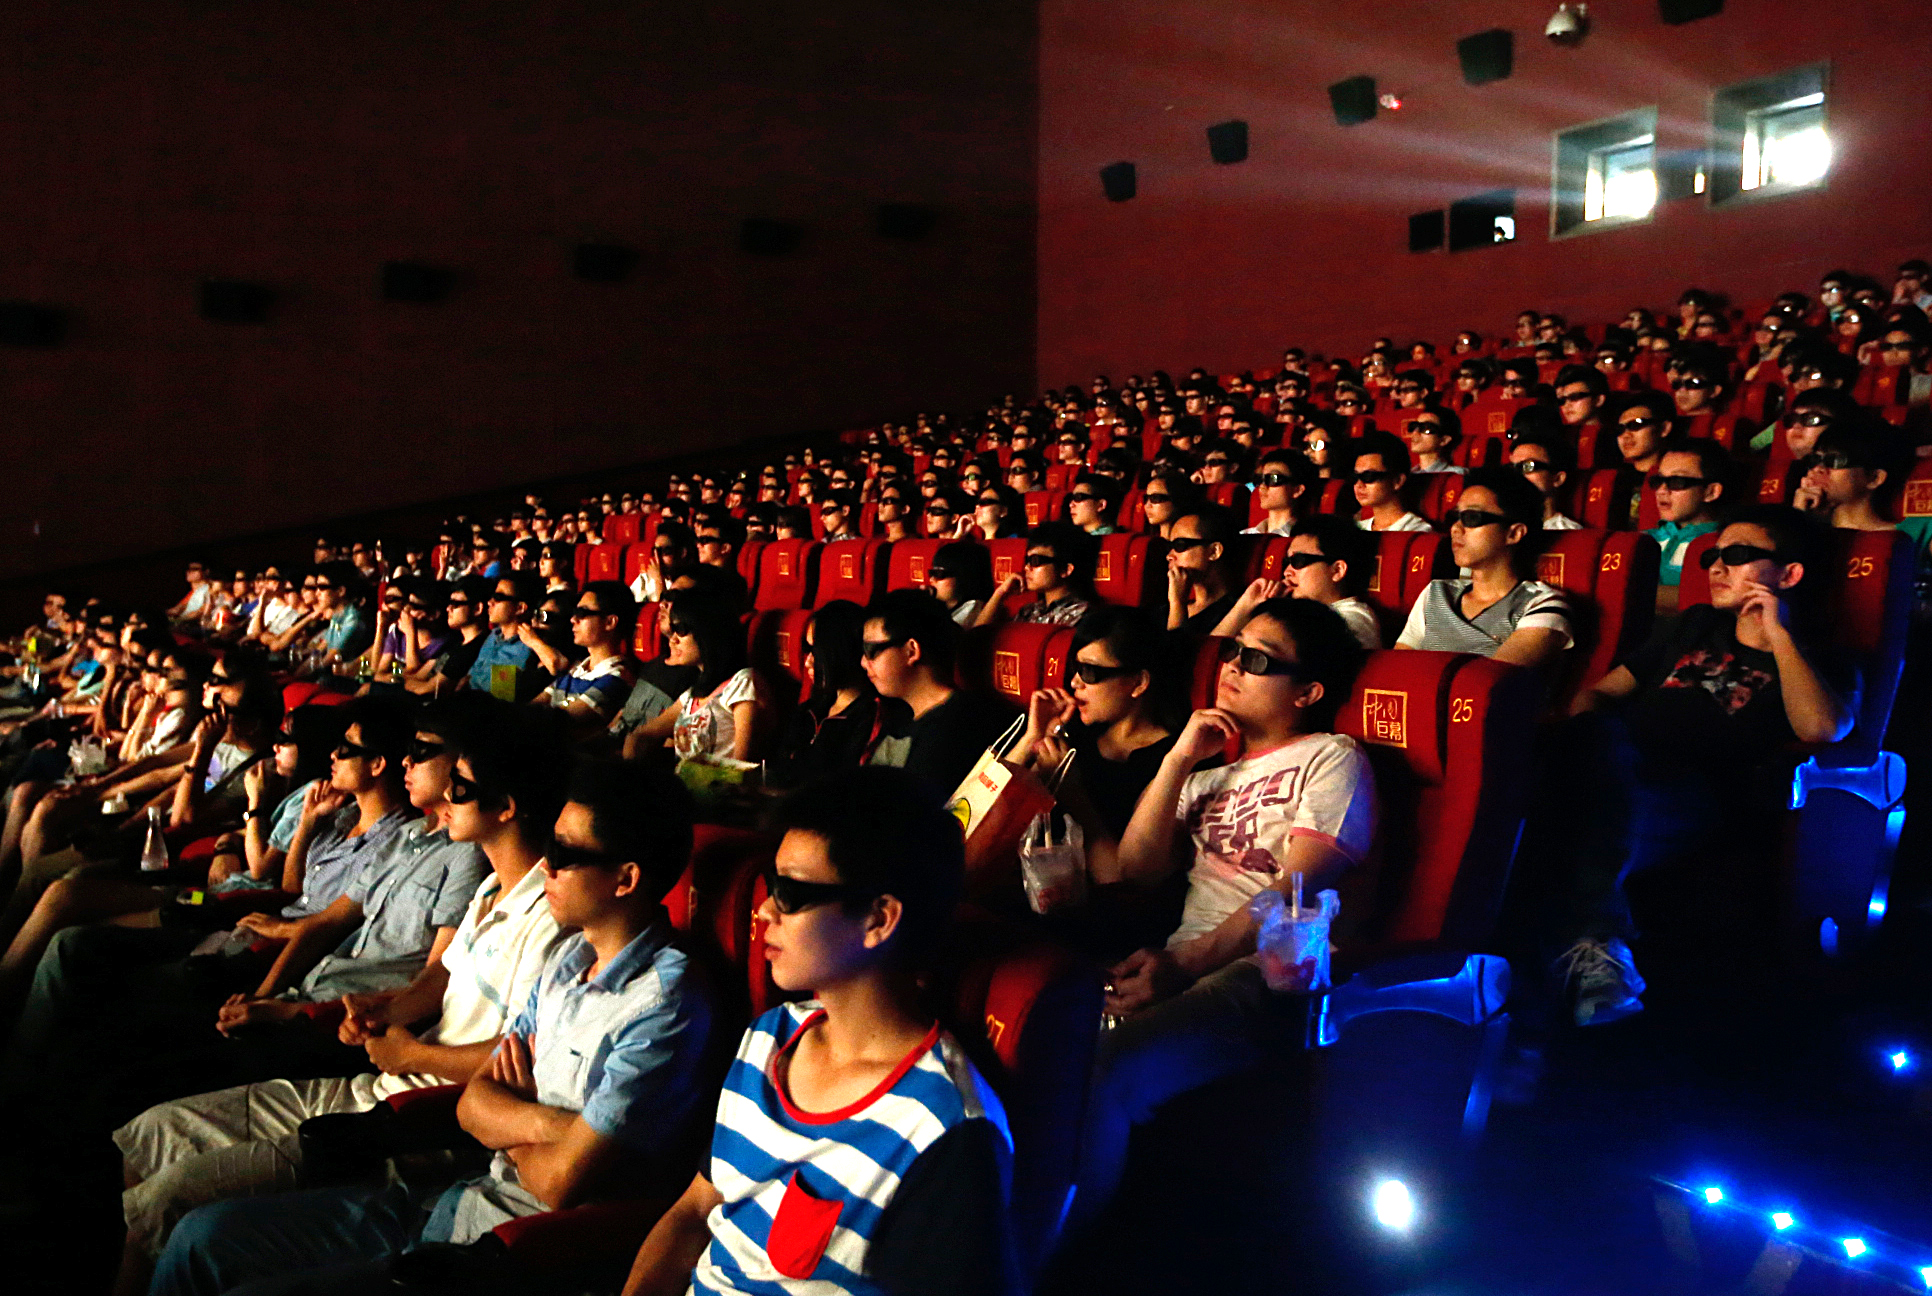 "Transformers - Age Of Extinction" Hot Showing In China